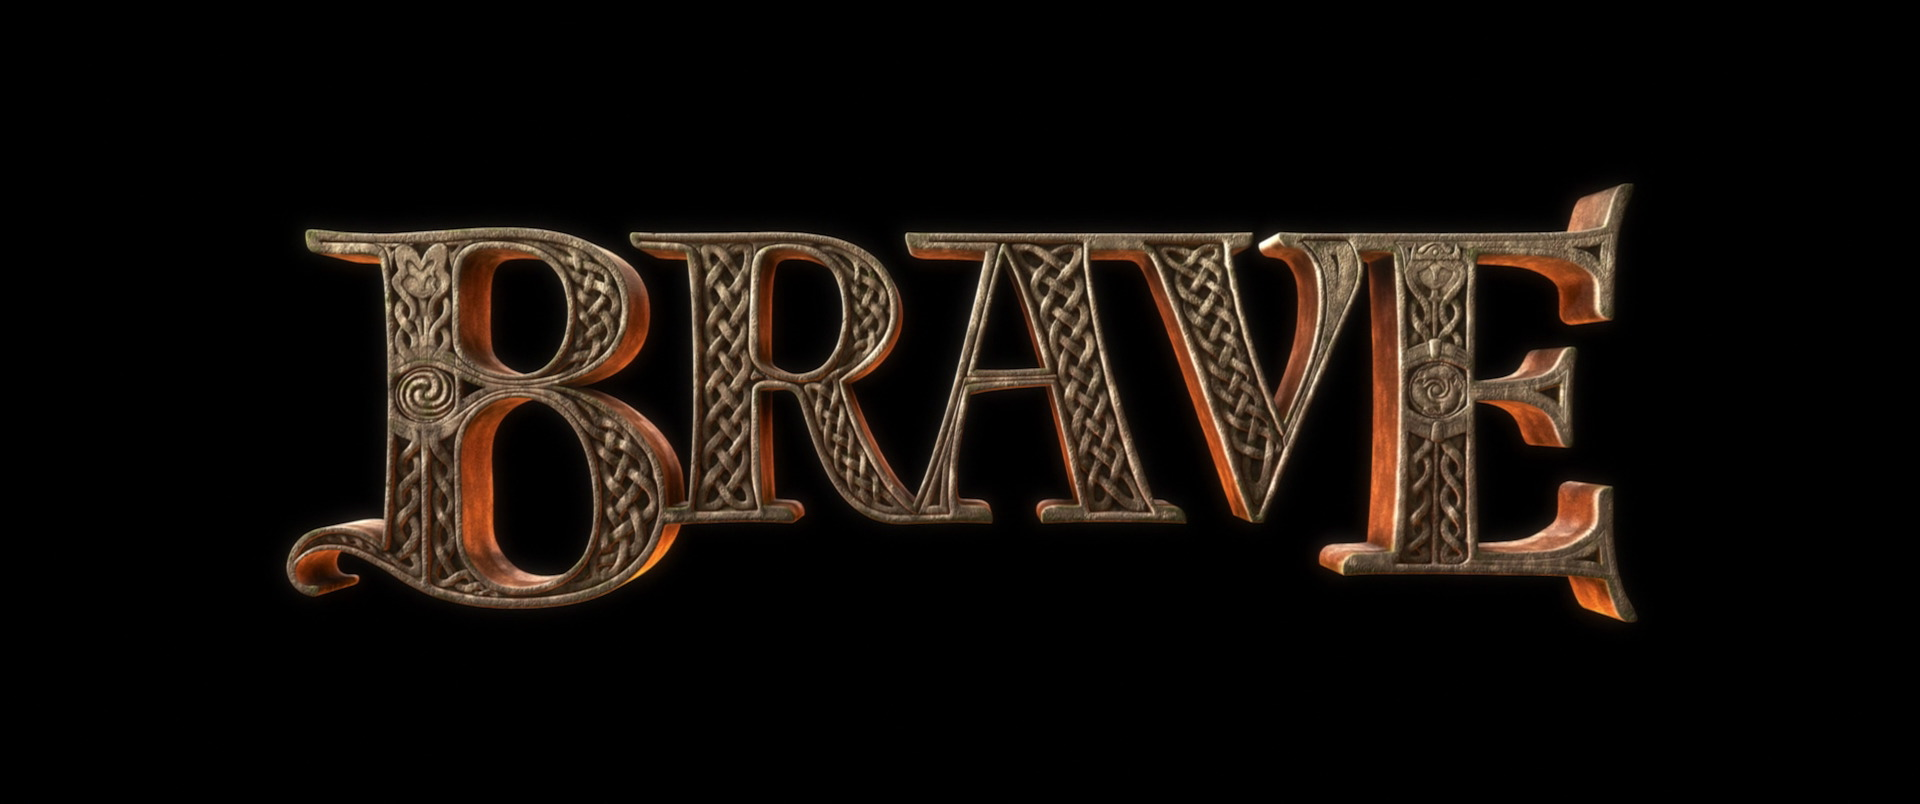 brave 1.52.126 for ios instal free